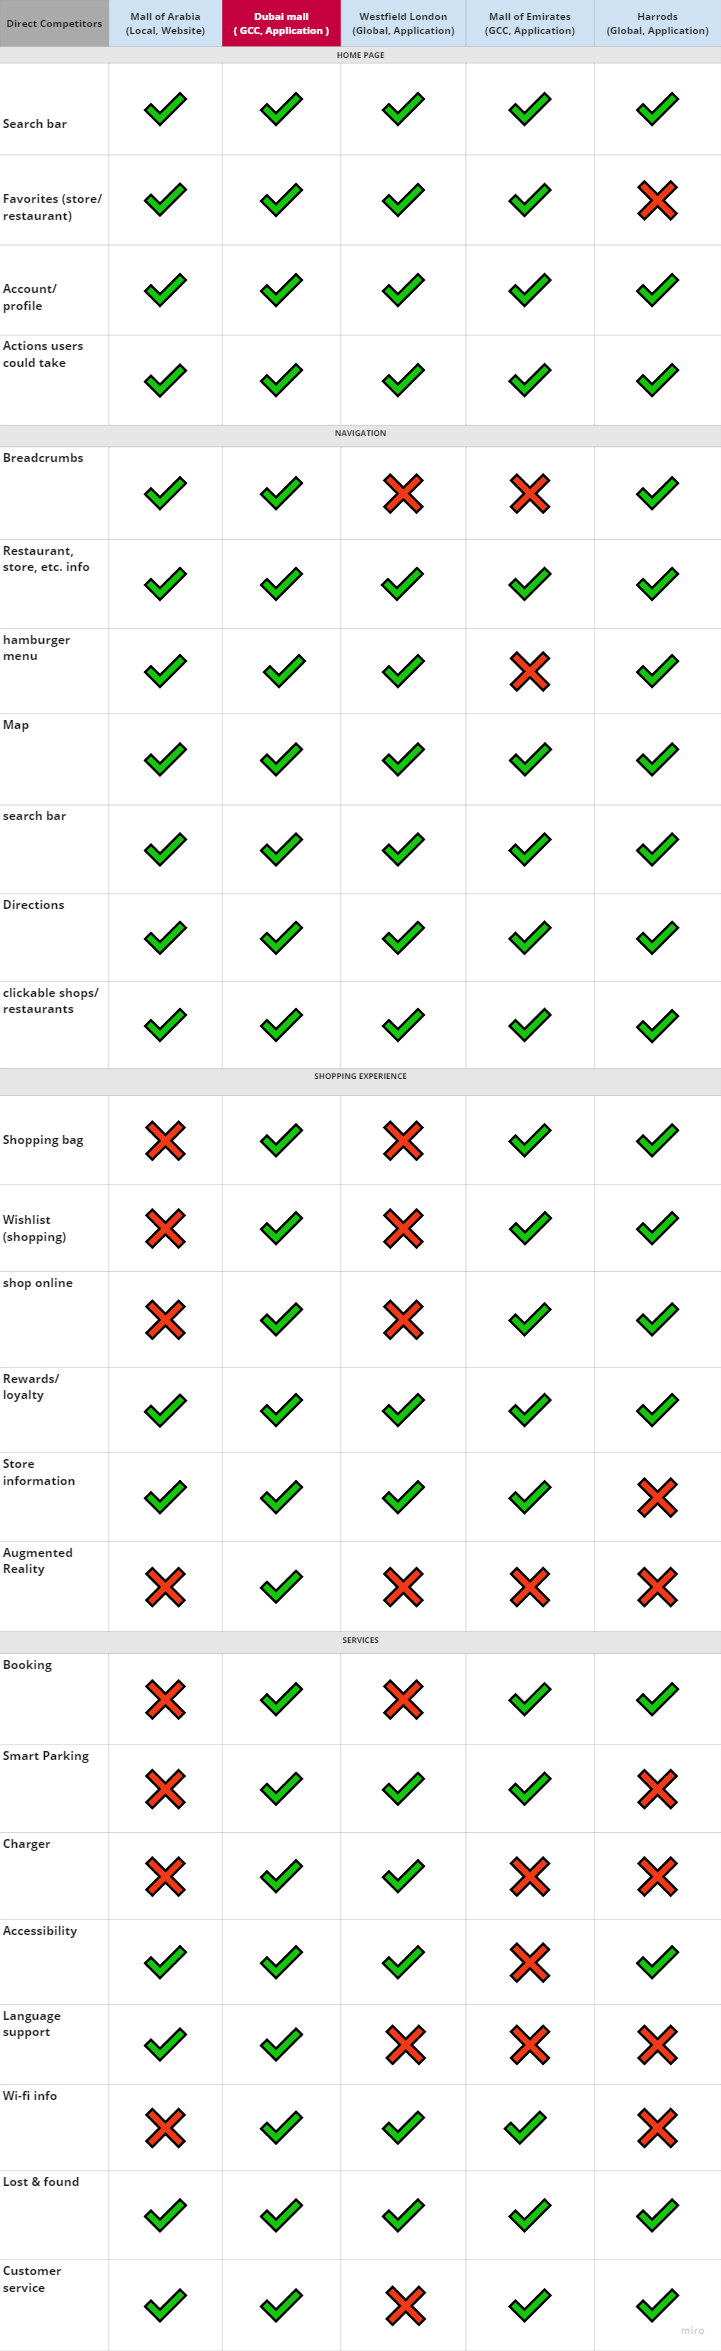 A table that compares between competitors in features